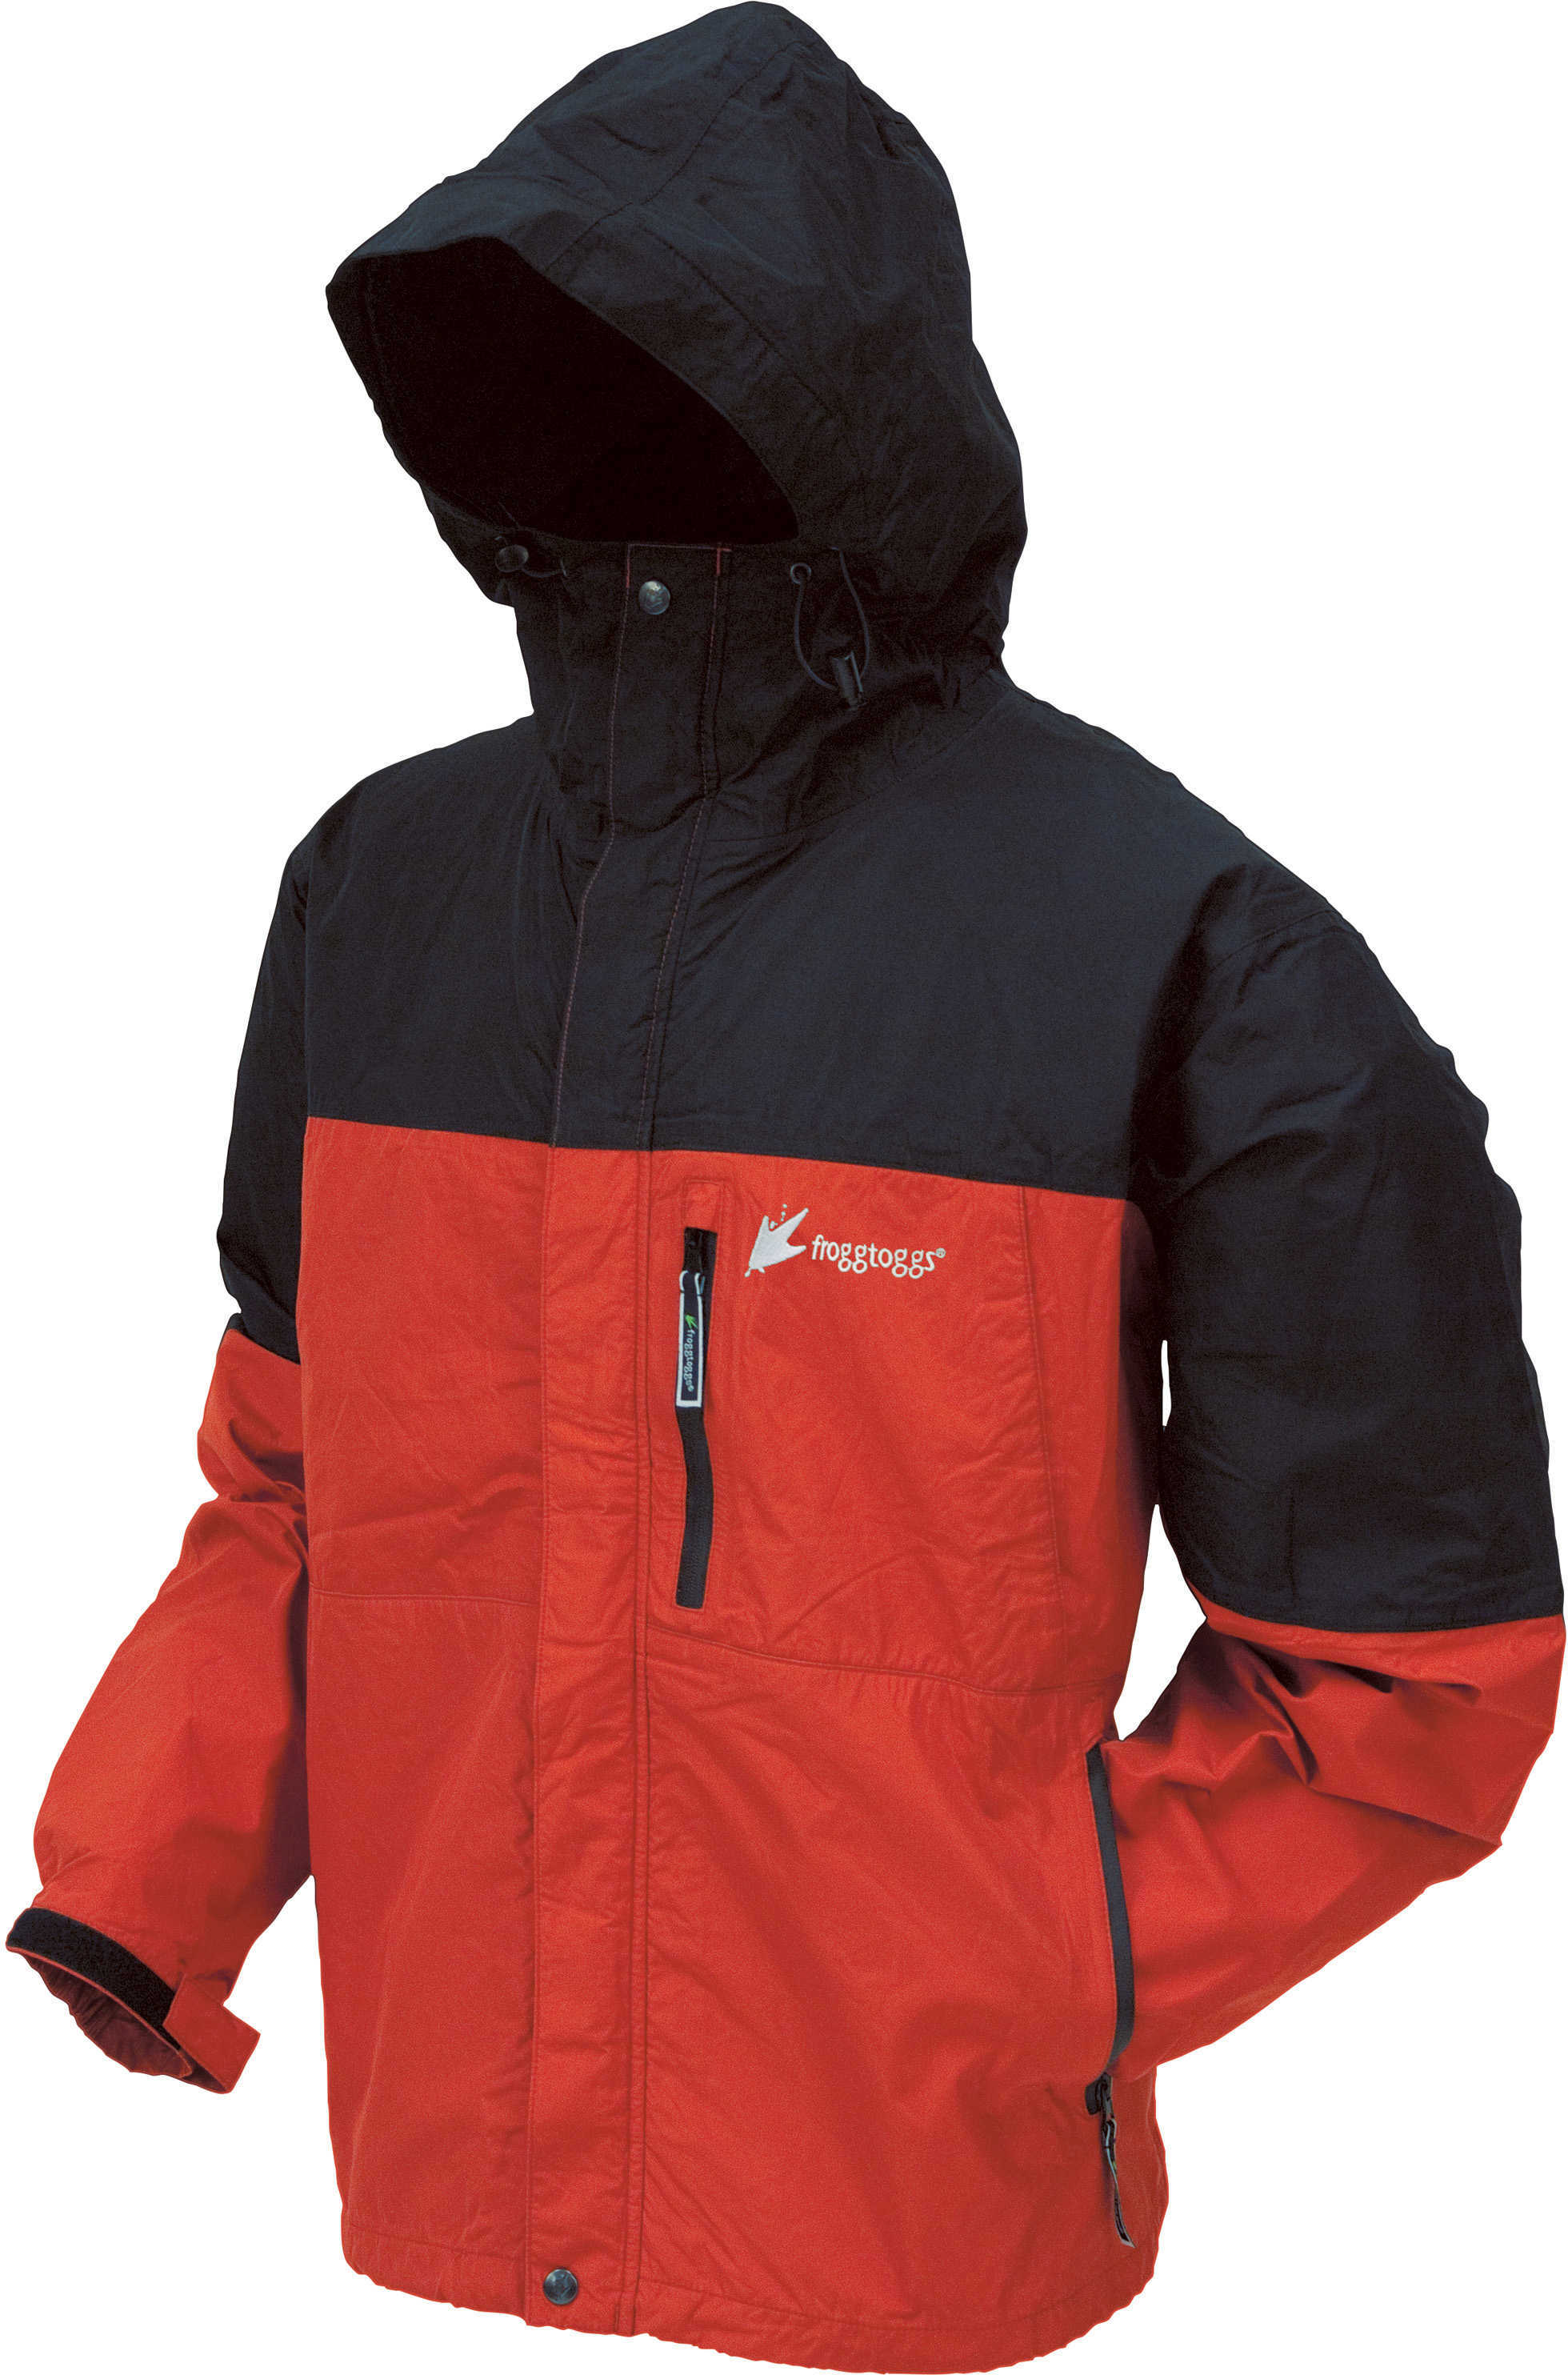 Frogg Toggs Toad-Rage Jacket Red/Black Small NT6601-110SM